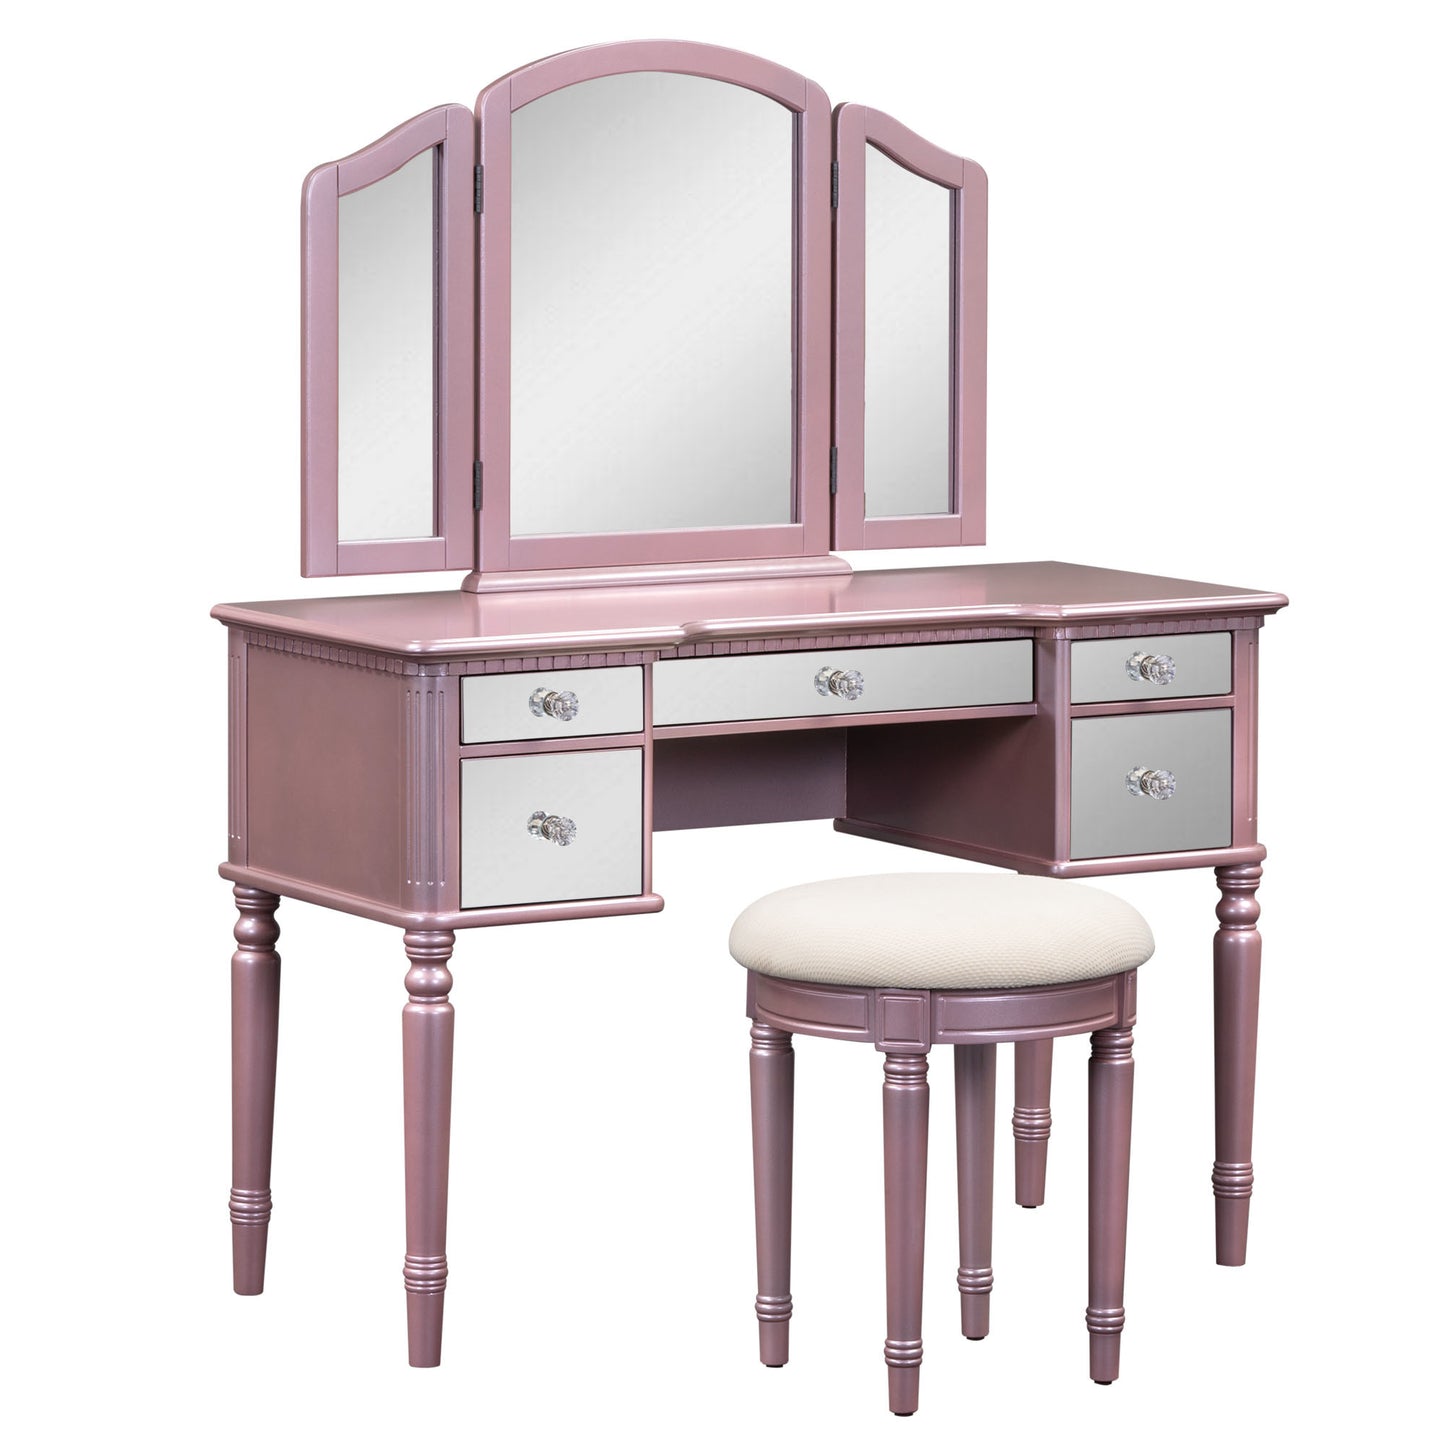 GO 43" Dressing Table Set with Mirrored Drawers and Stool, Tri-fold Mirror, Makeup Vanity Set for Bedroom, Rose Gold - lolaluxeshop